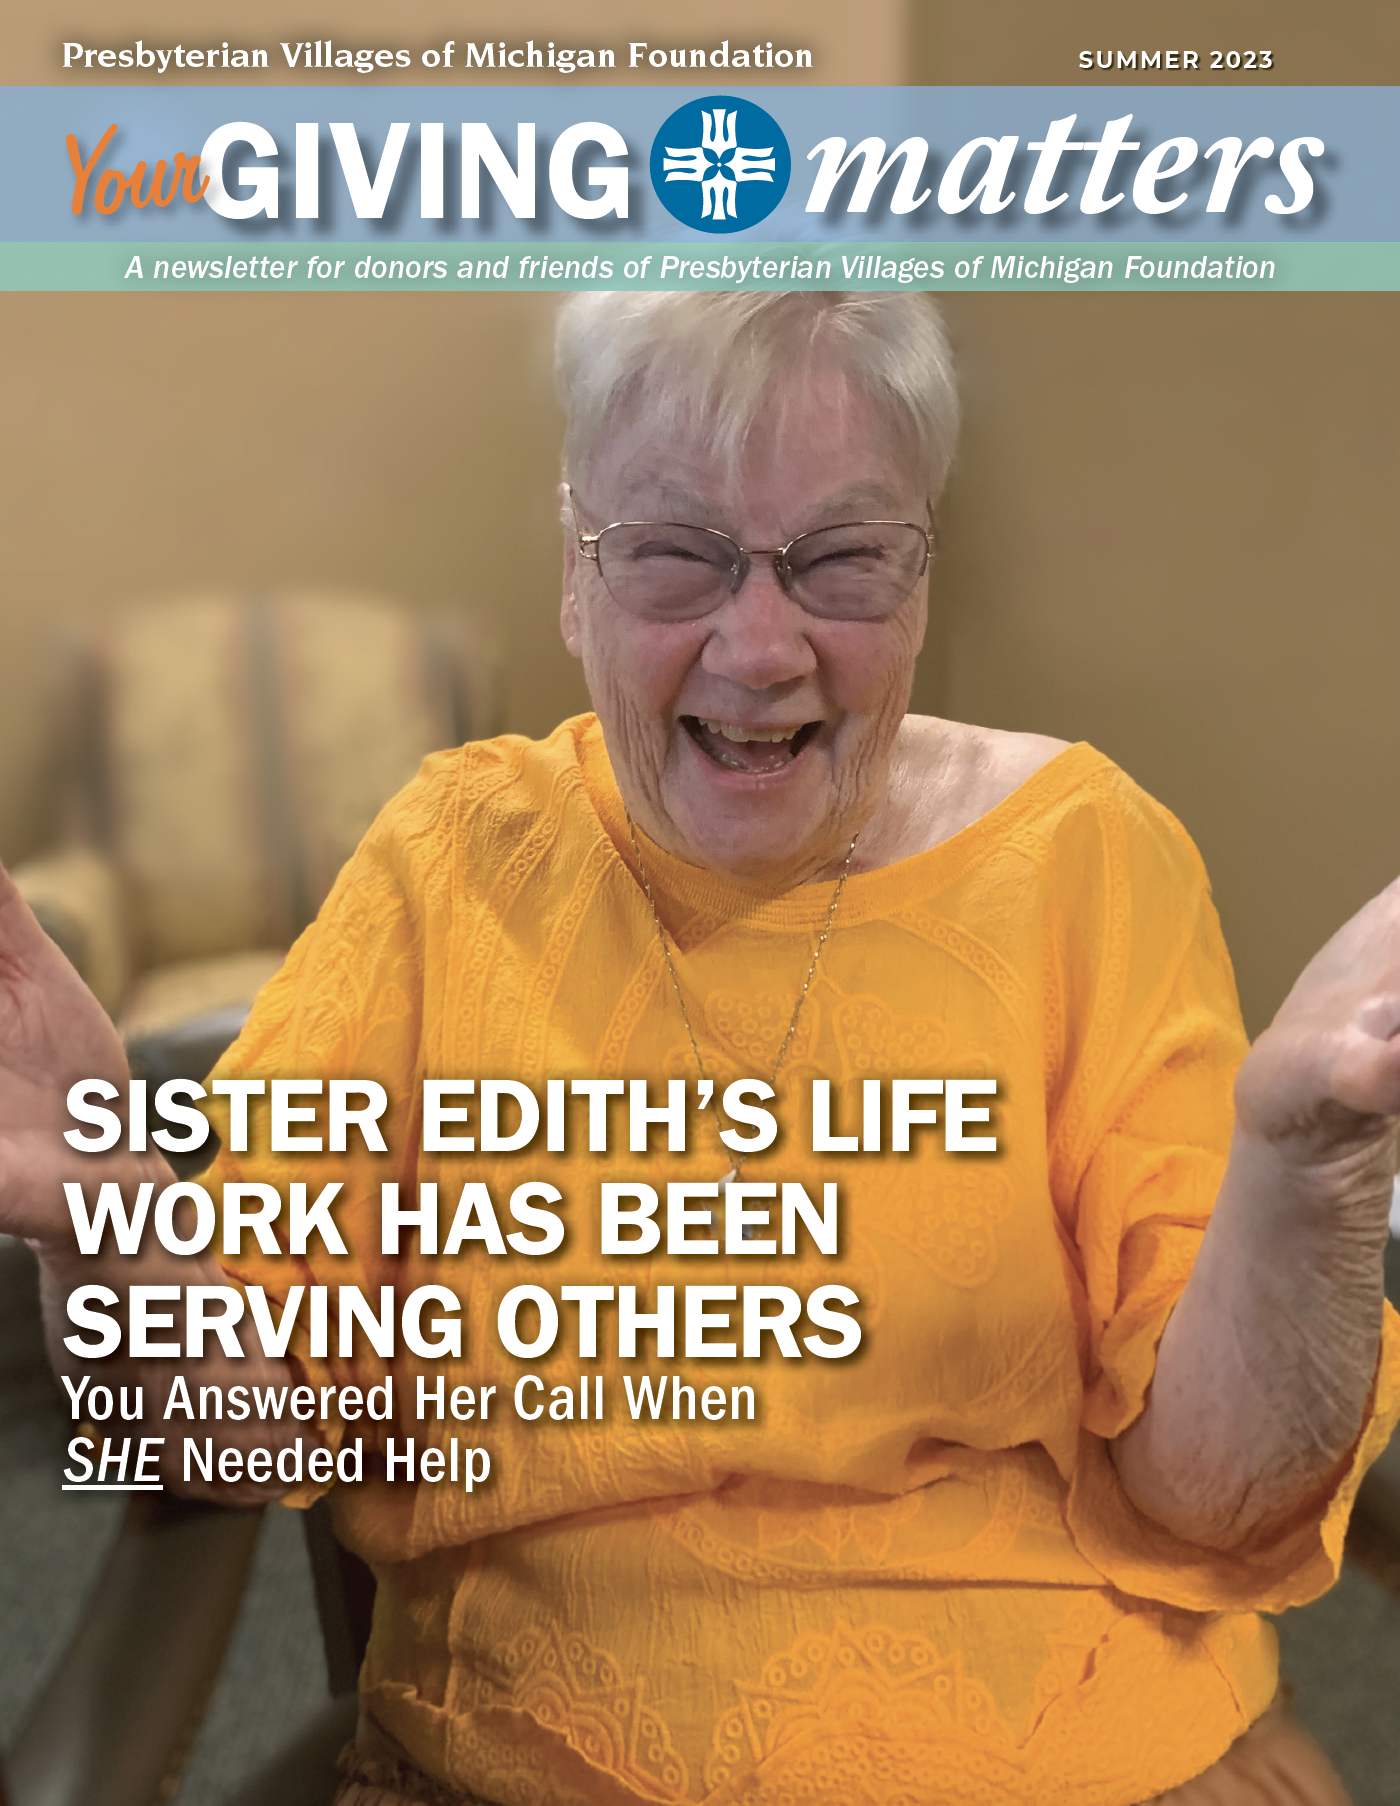 Cover of Your Giving Matters Summer 2023 featuring Sister Edith from the Village of Hampton Meadows